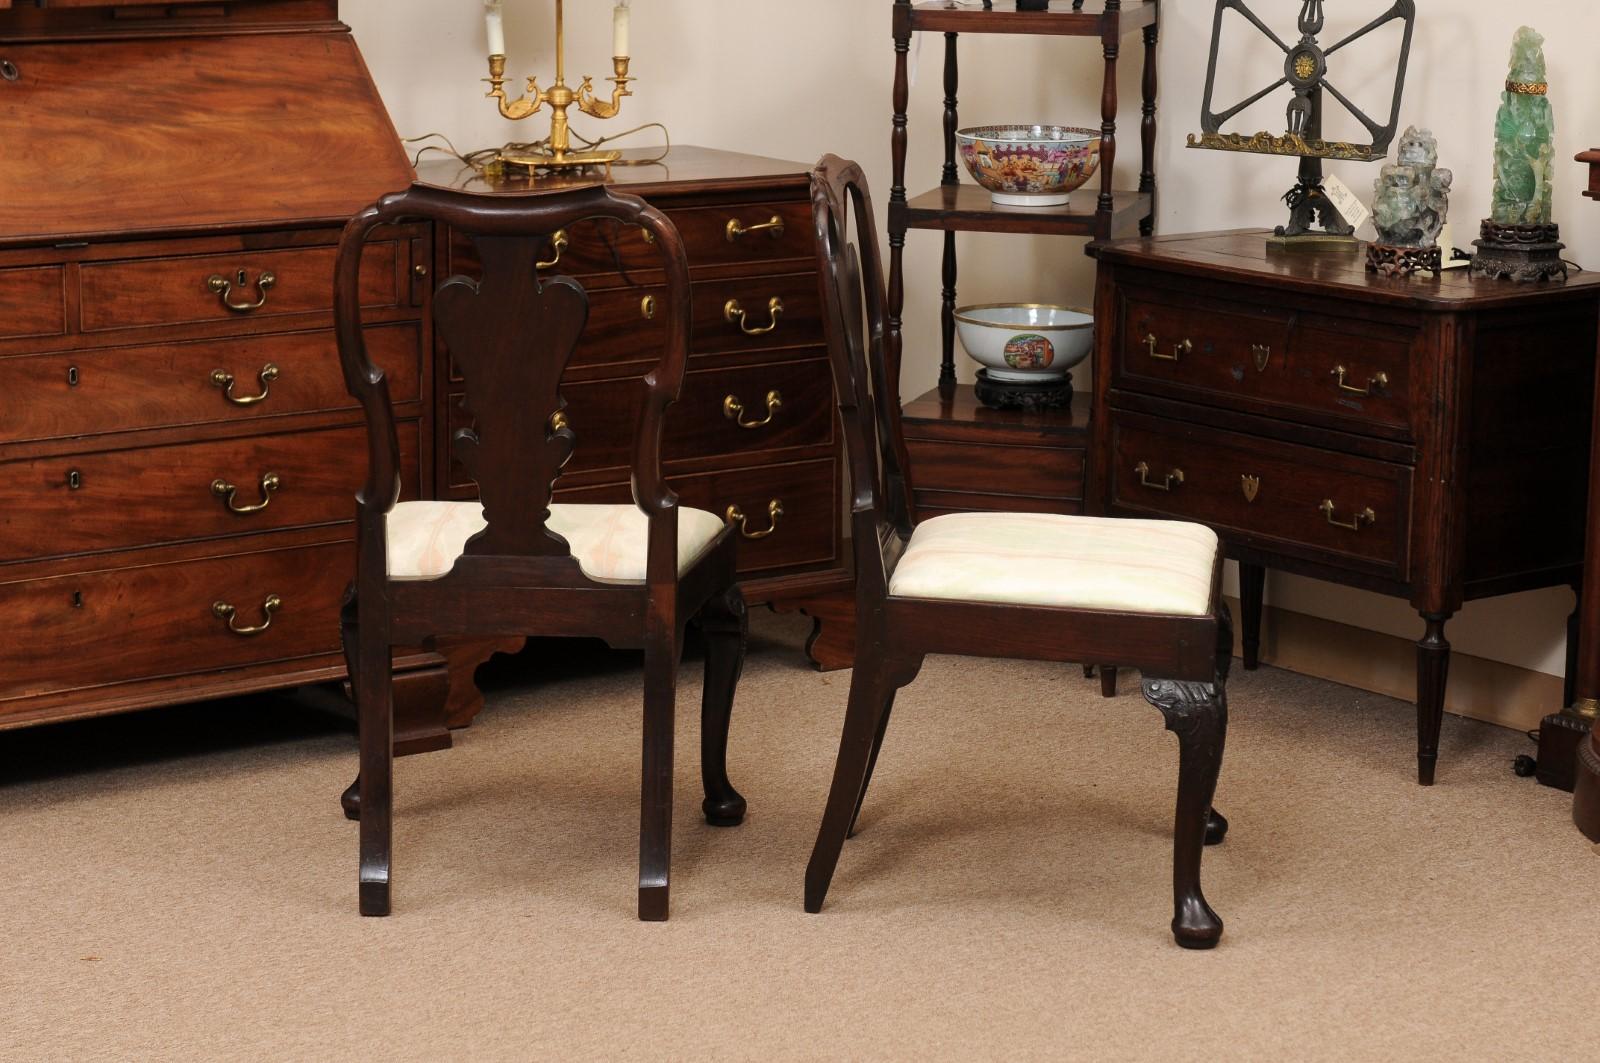 Pair of Queen Anne Walnut Side Chairs, 18th Century England For Sale 4